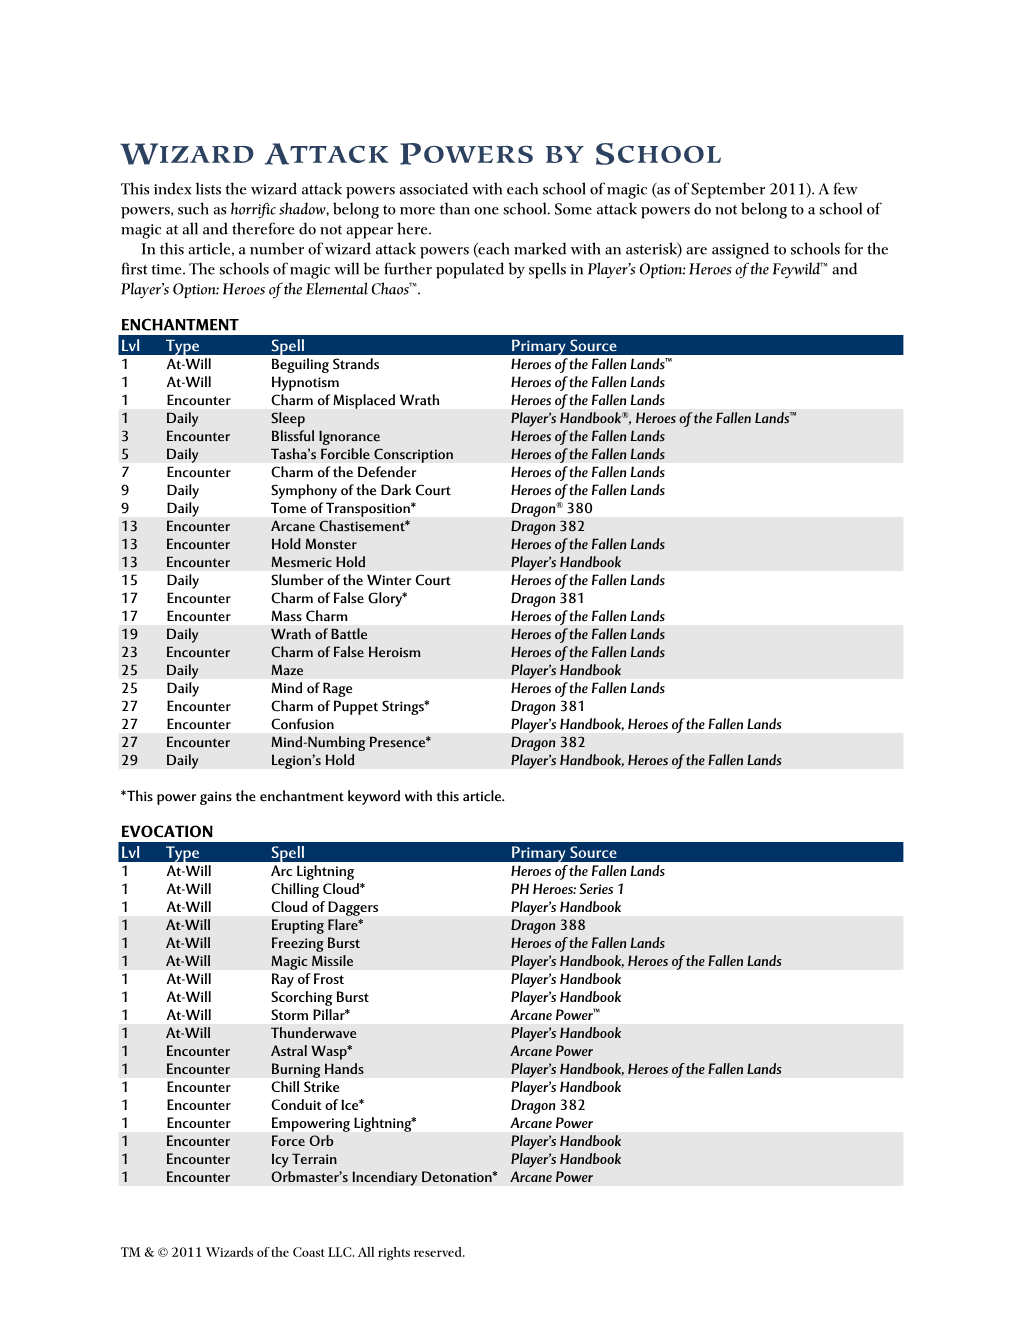 WIZARD ATTACK POWERS by SCHOOL This Index Lists the Wizard Attack Powers Associated with Each School of Magic (As of September 2011)